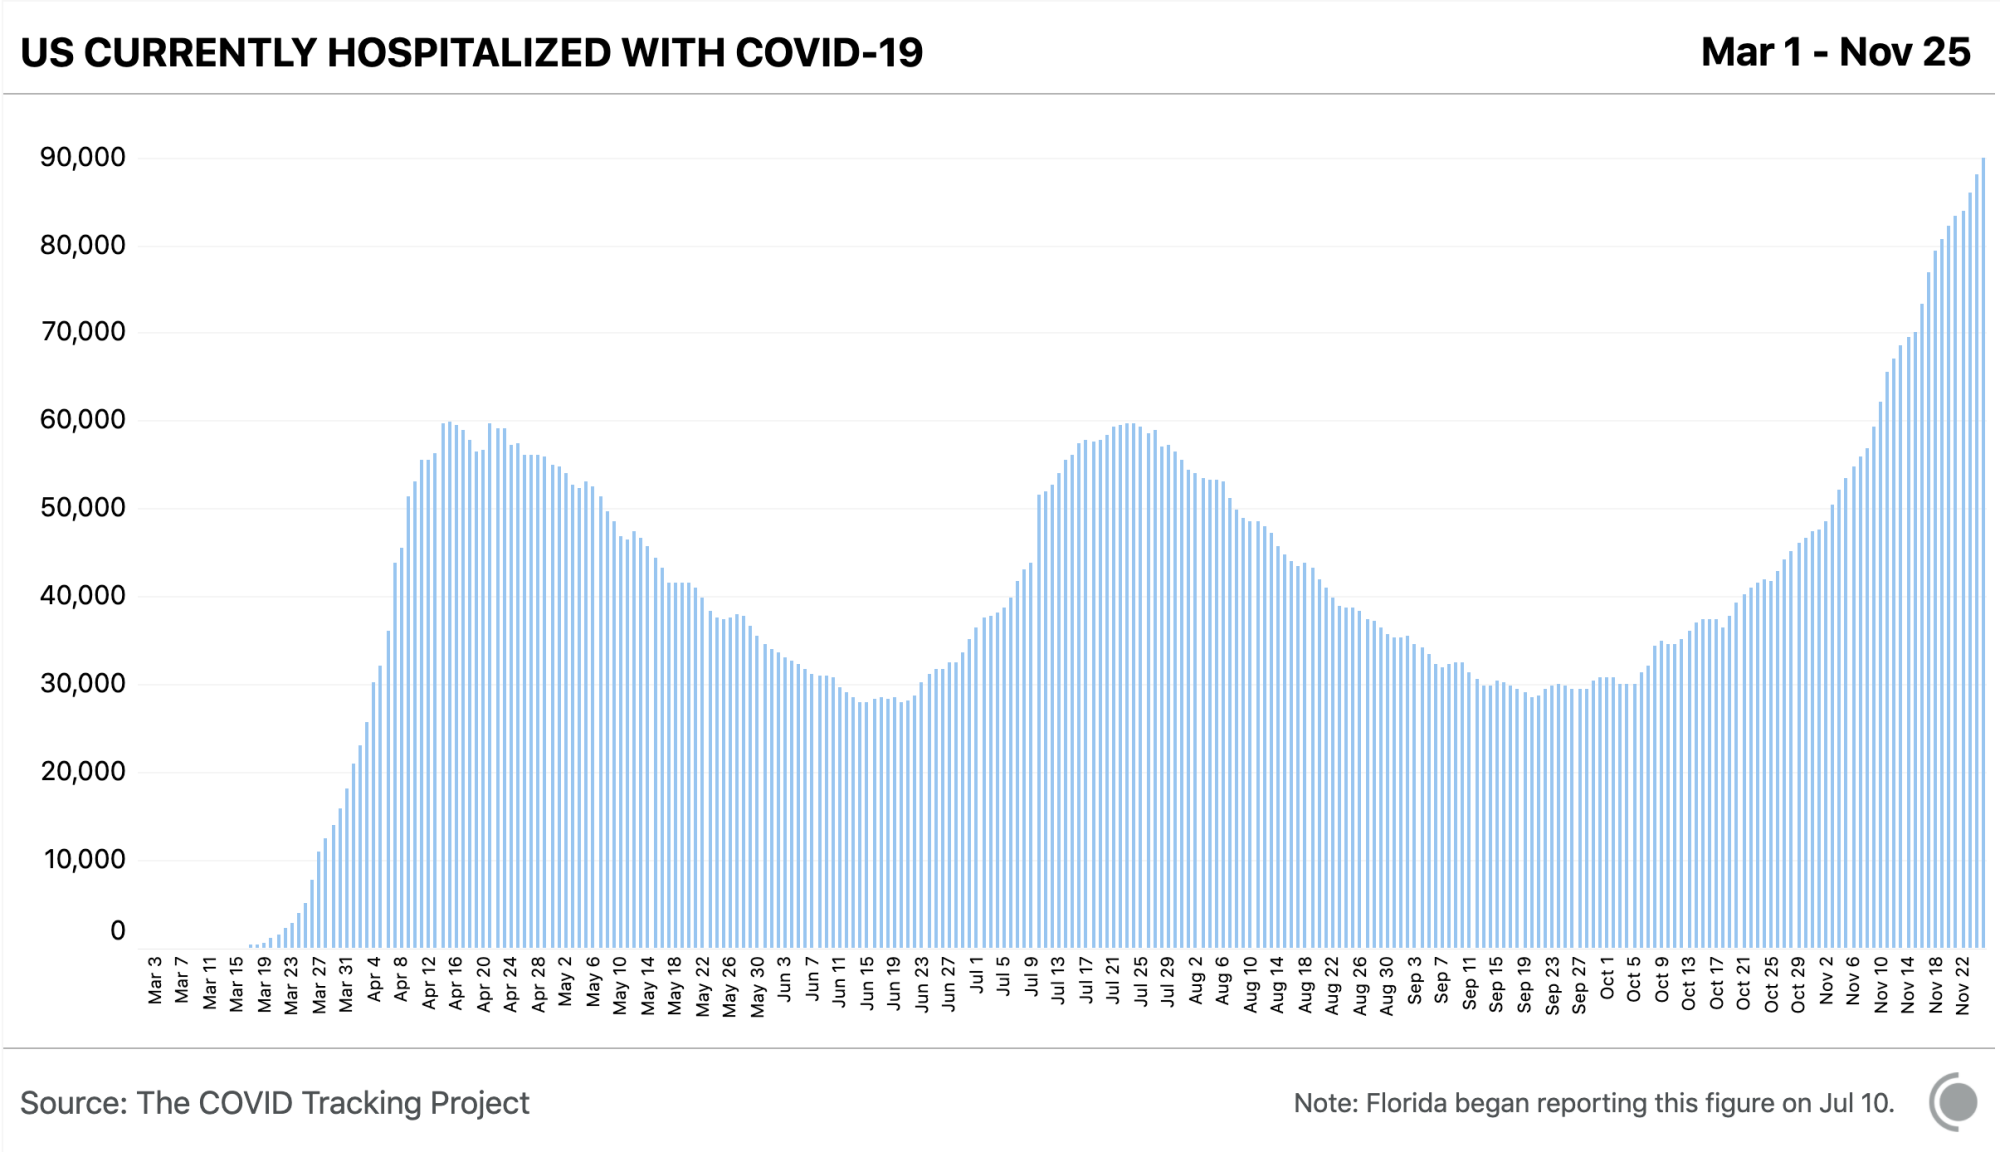 Chart showing the number of people reported hospitalized with COVID-19 from March 1, 2020 to November 25, 2020. The number is currently rising, and is far above past peaks in the spring and summer.